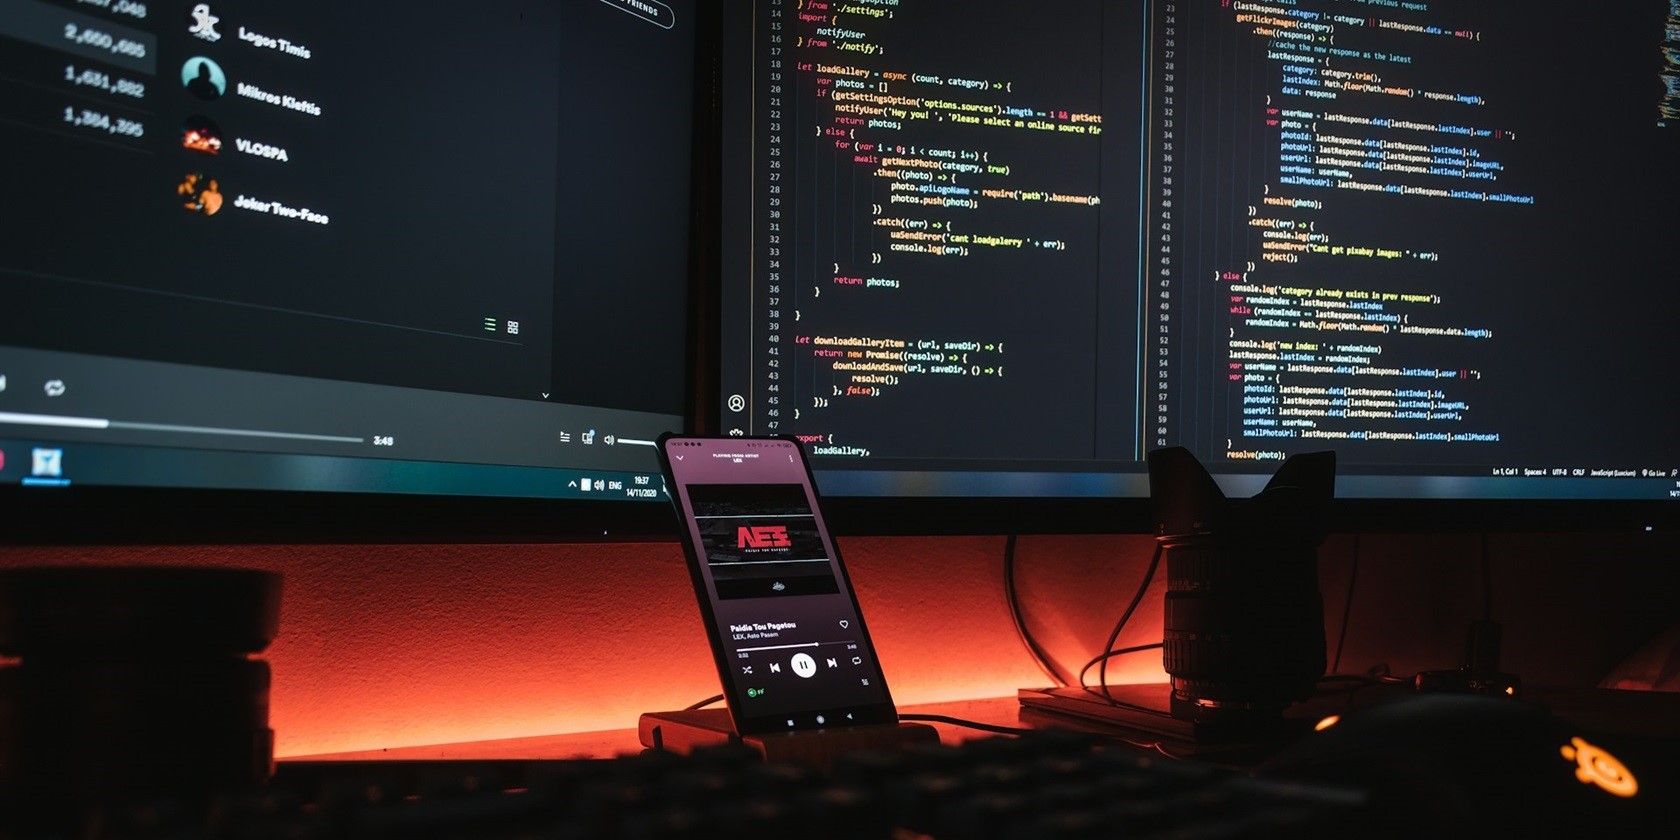 A workstation with two monitors and a mobile phone. A music player is open on the phone, while code is displayed on the two monitors.